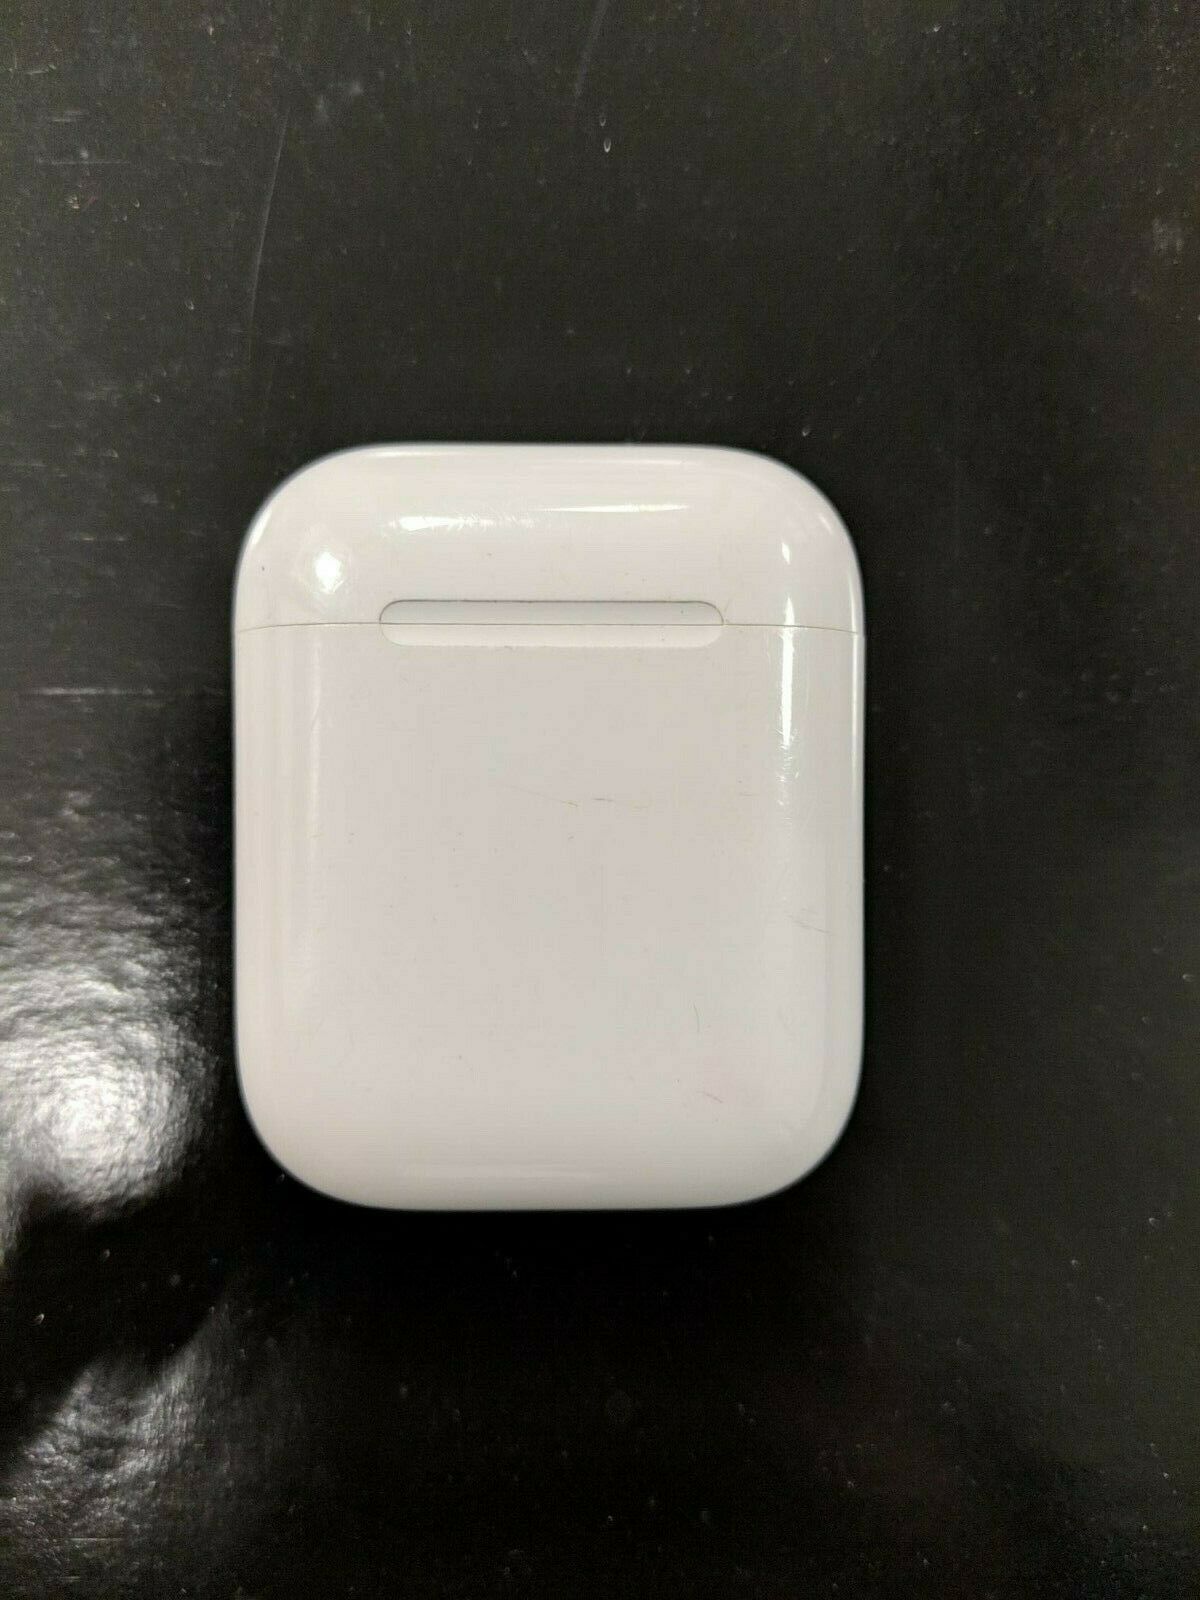 Apple Airpods Charging Case Genuine Apple Airpods Charging Case For Replacement